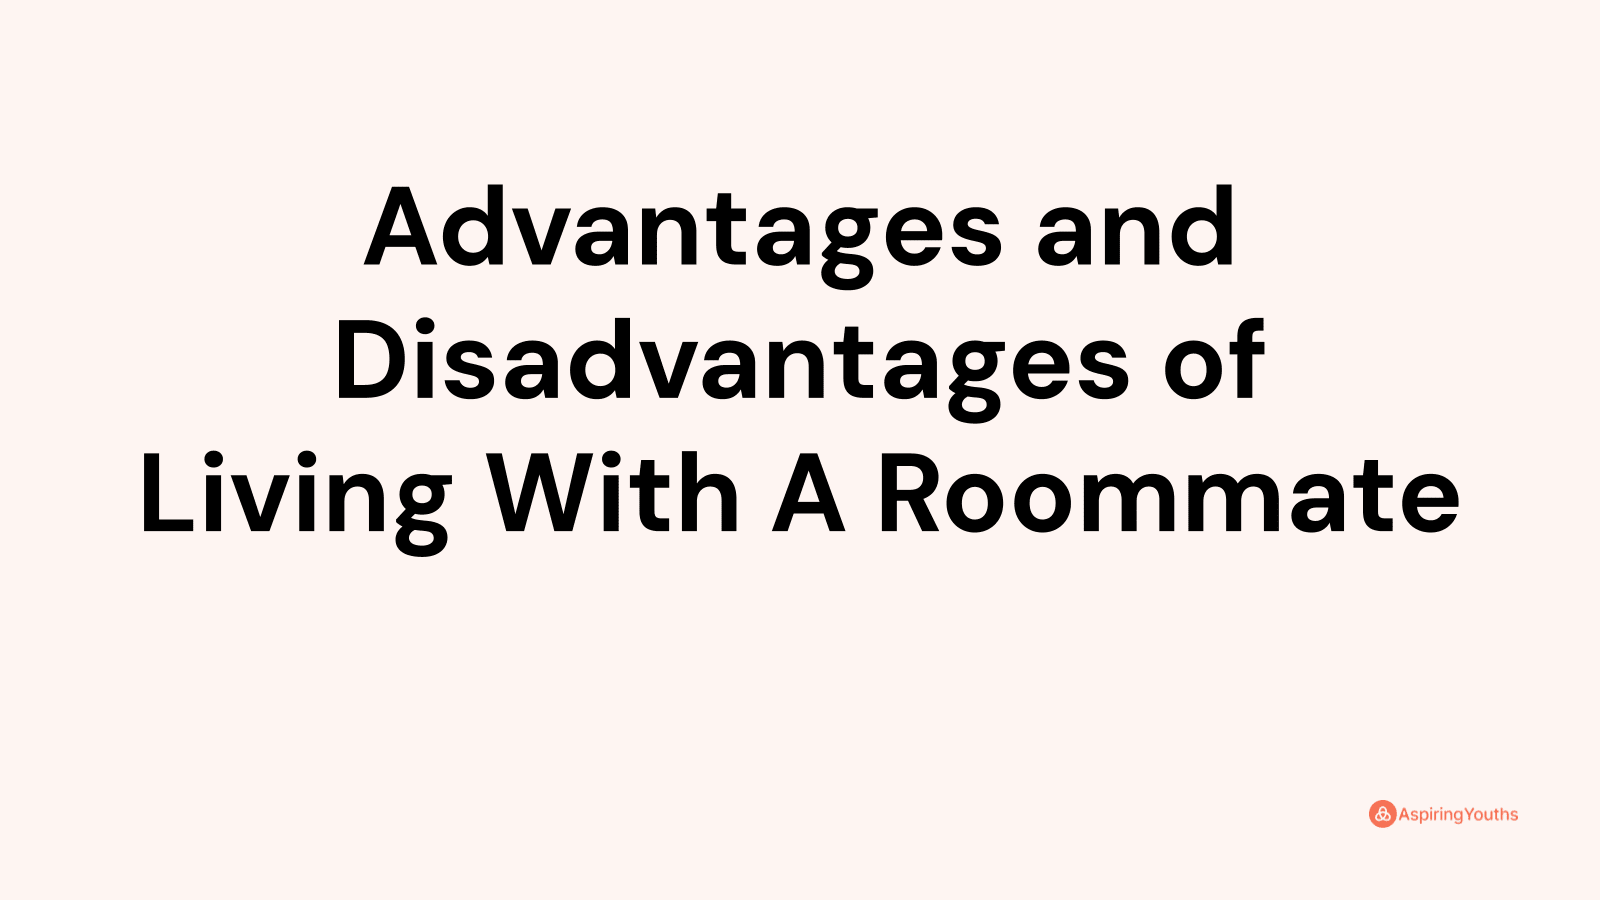 Advantages and disadvantages of Living With A Roommate